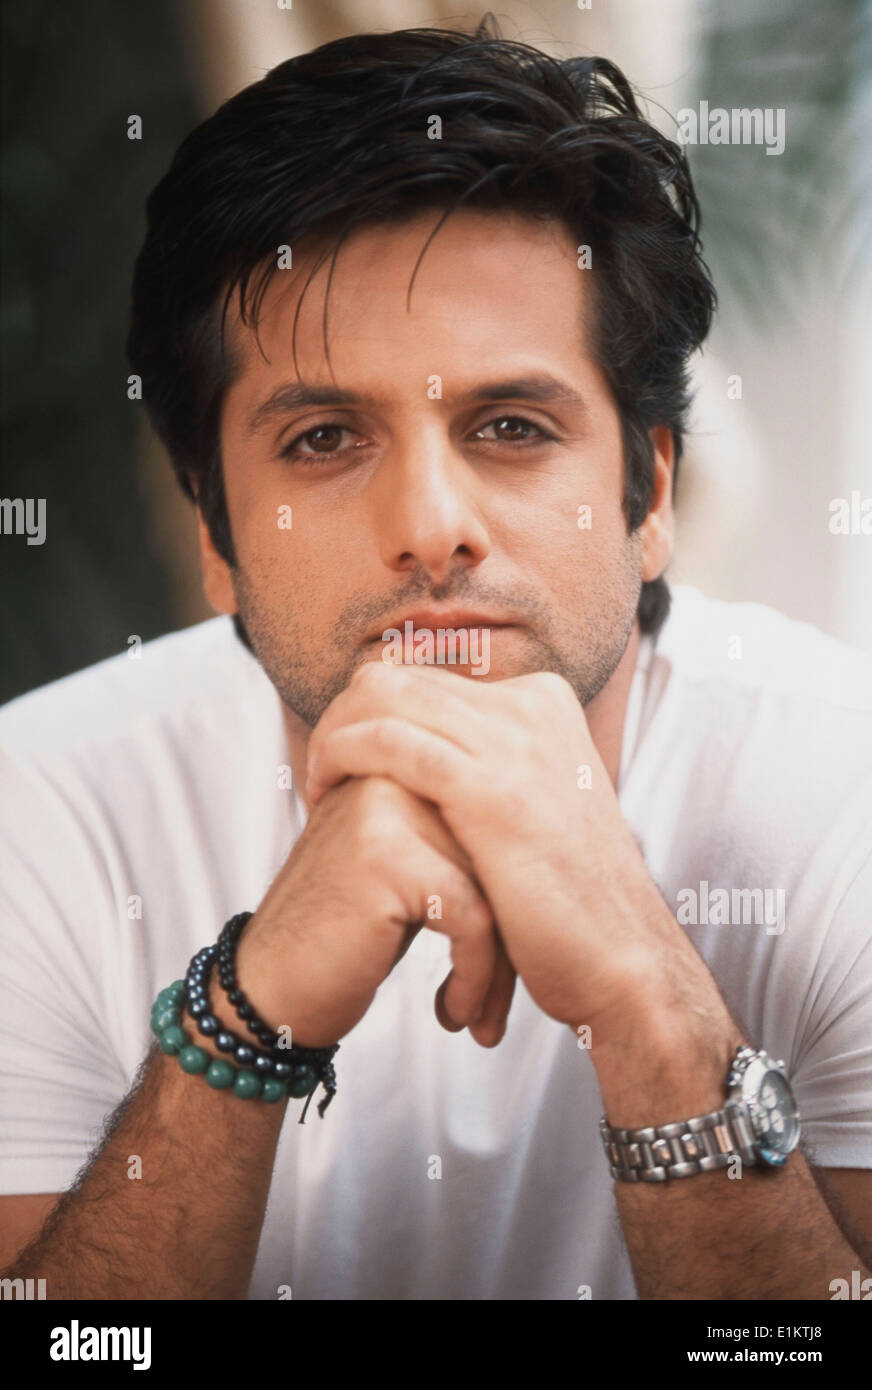 Bollywood Actor Fardeen Khan High Resolution Stock Photography and Images -  Alamy